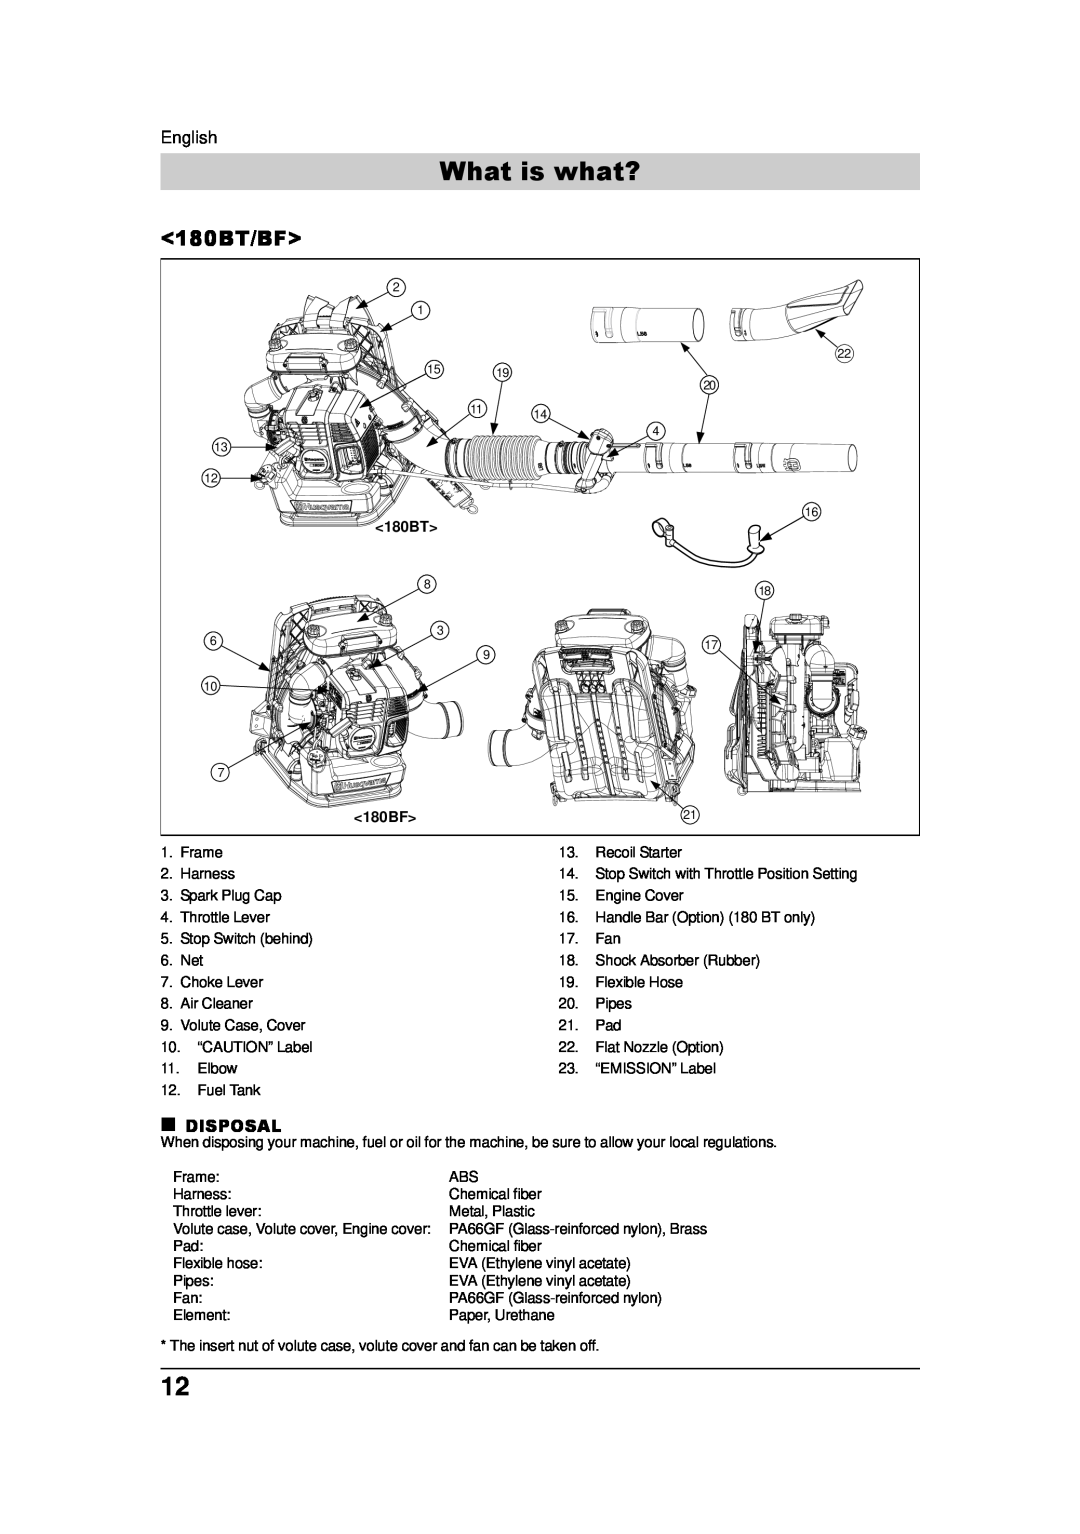 Husqvarna 150BF, 115 09 83-95 manual What is what?, 180BT/BF, 180BF 